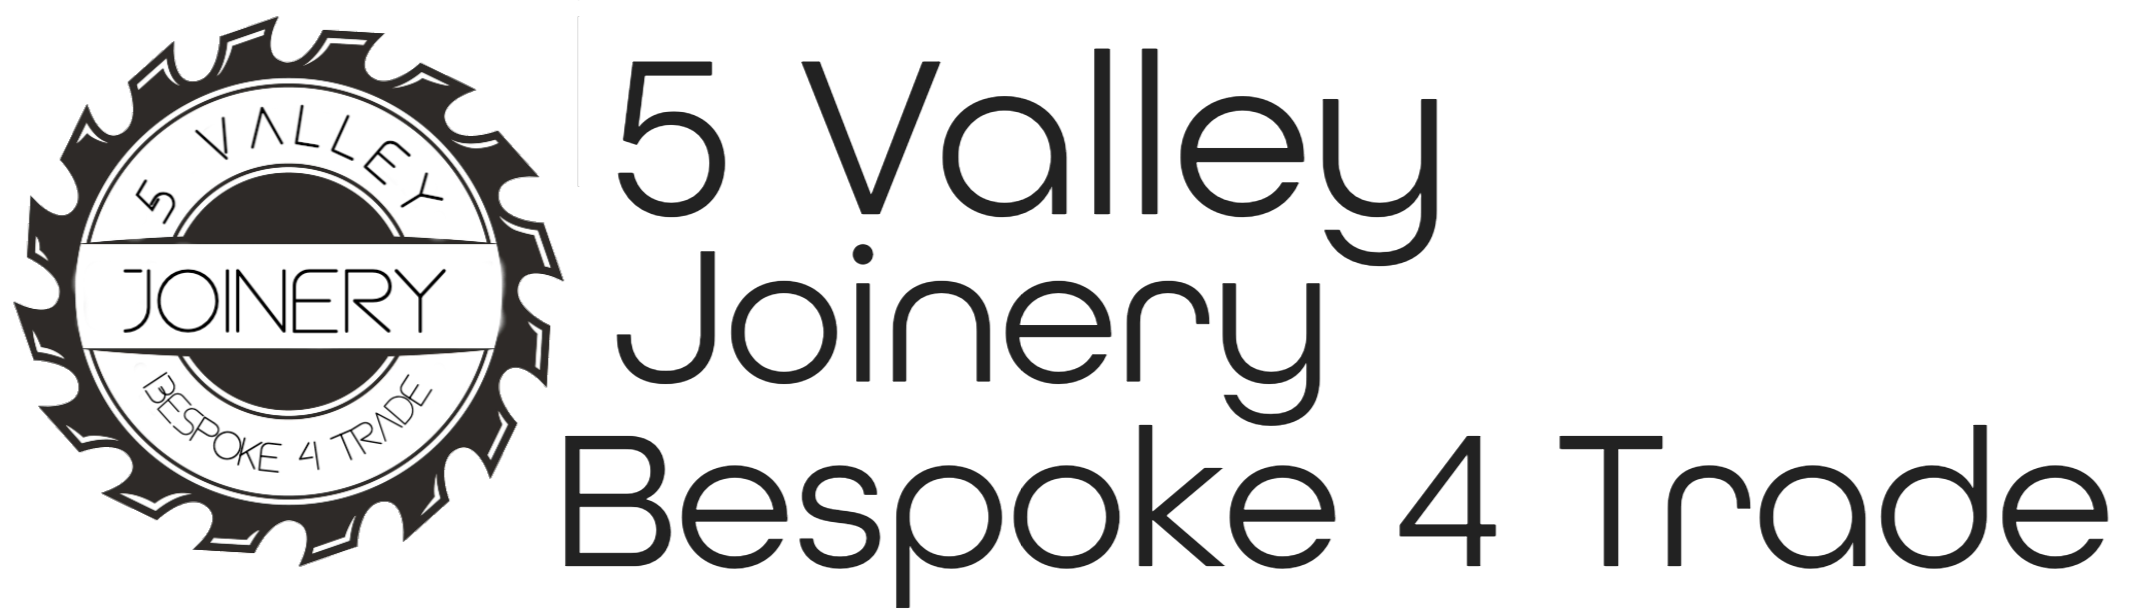 5 Valley Joinery